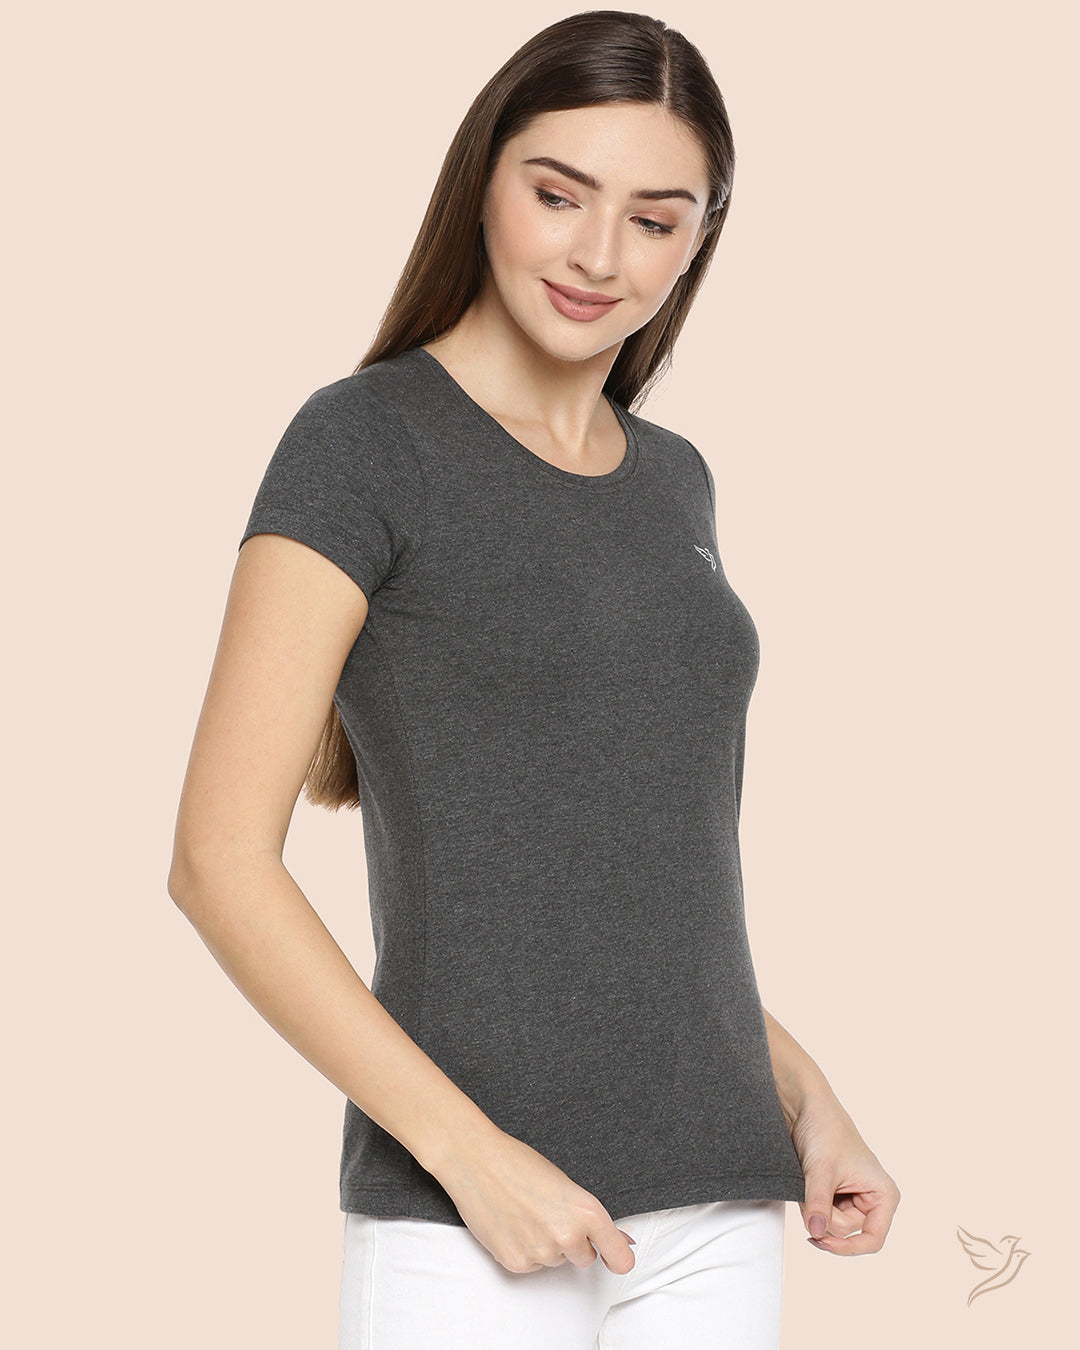 Charcoal Mix Slim Fit Signature Tee for Women